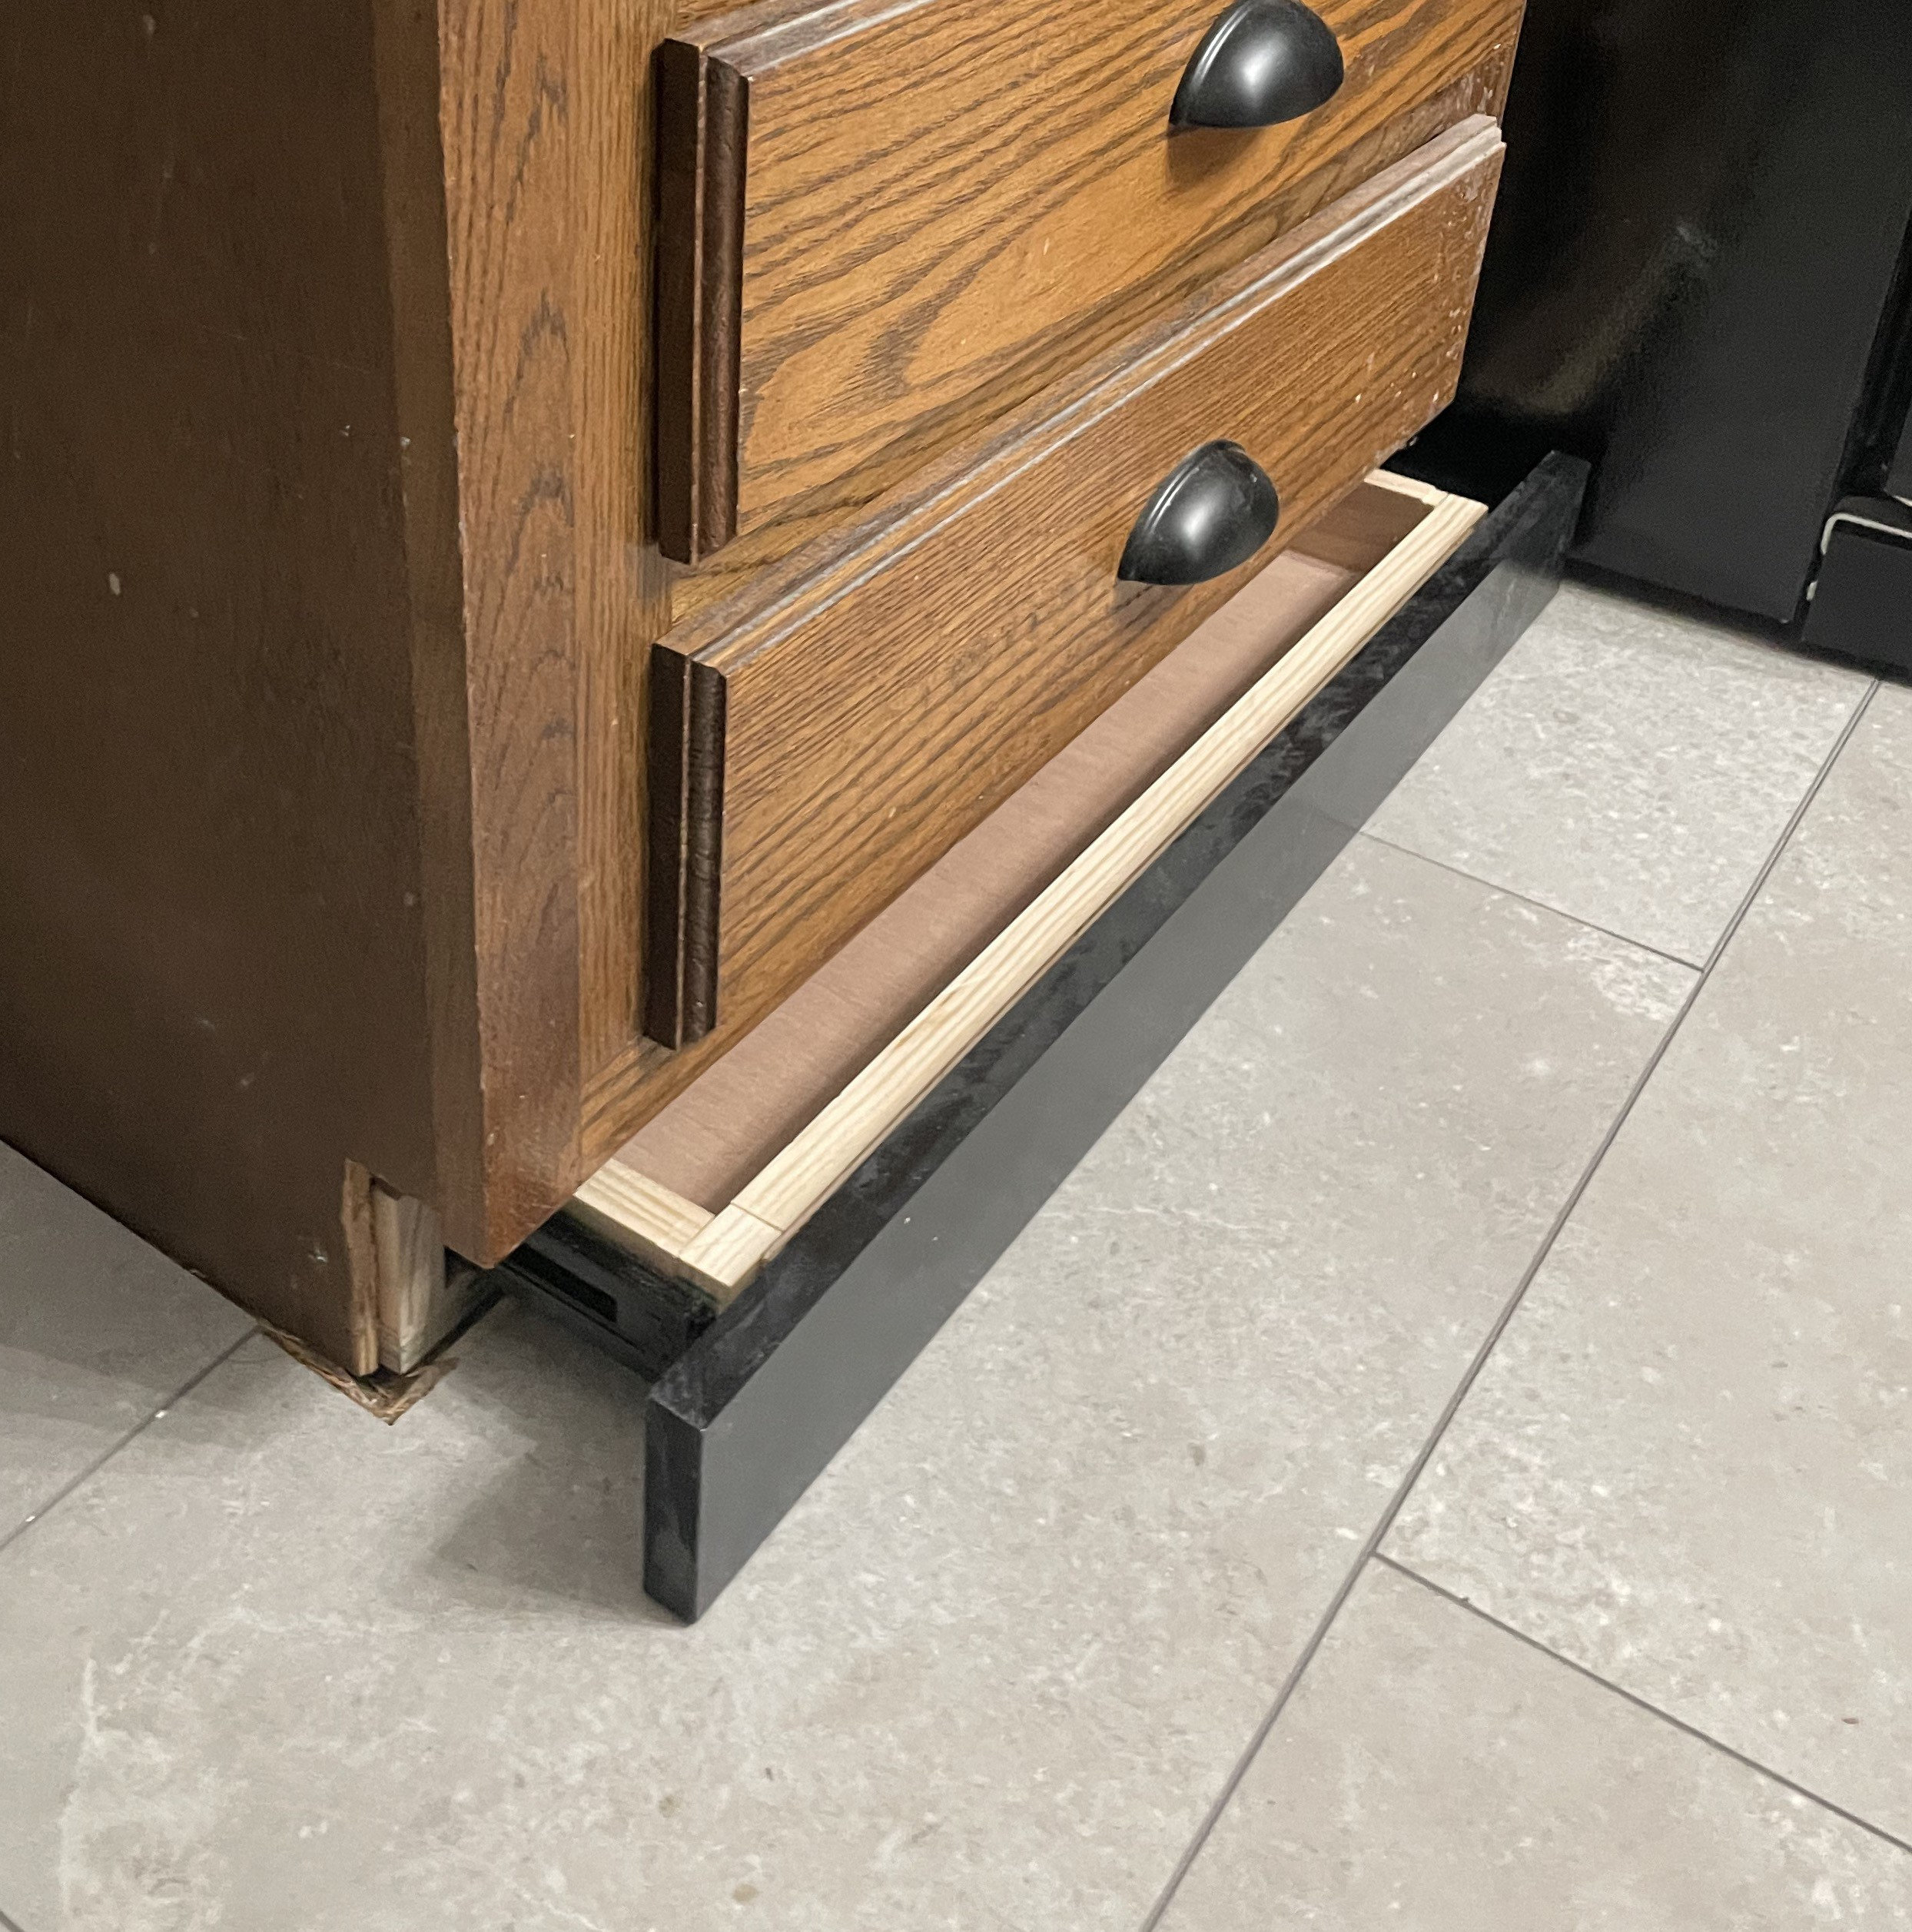 3 Reasons To Add a Toe-Kick Drawer To Your Home